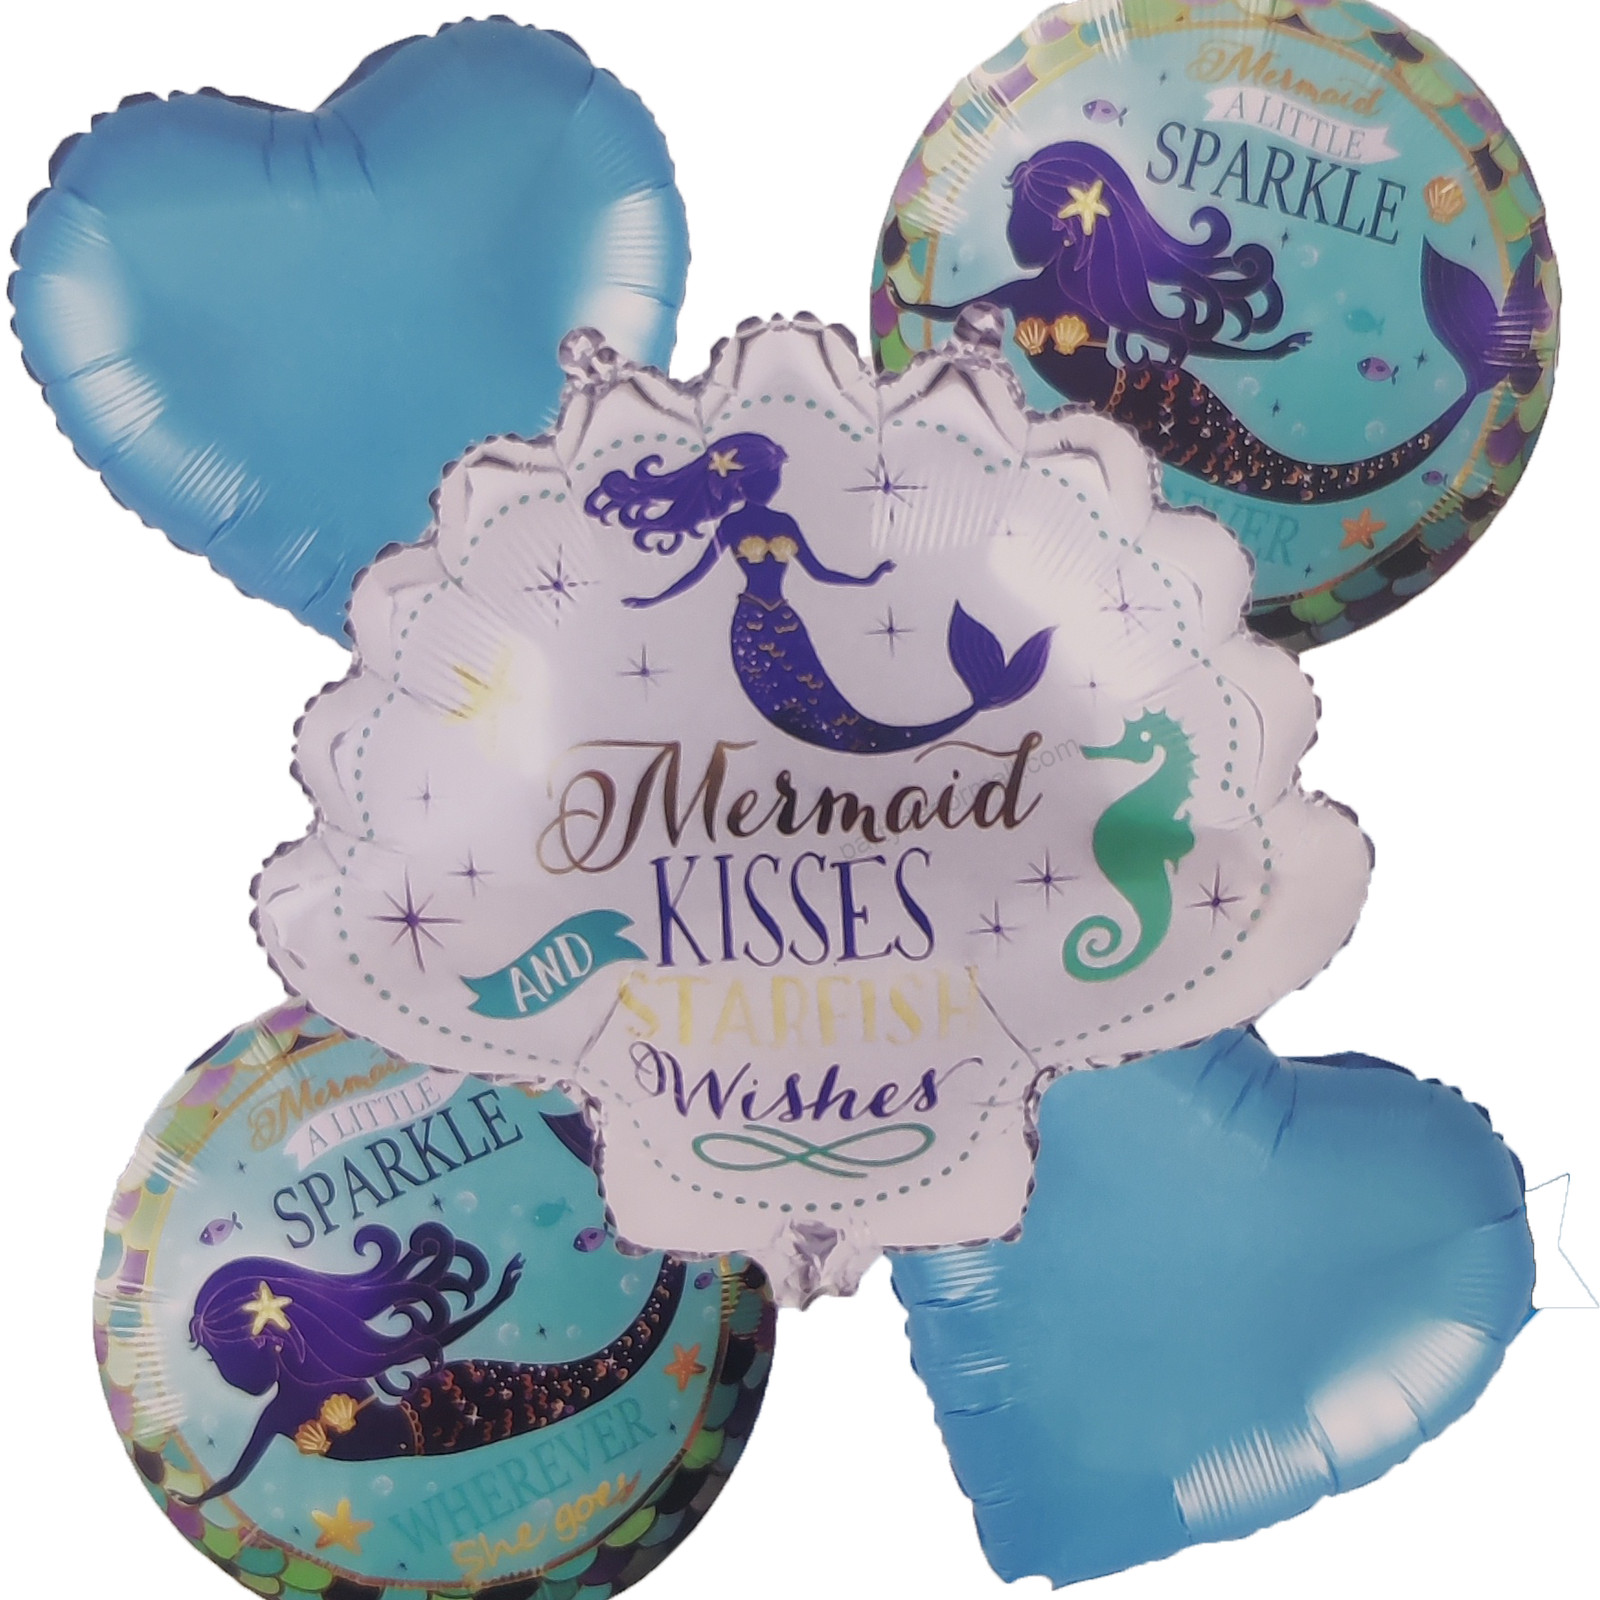 Mermaid kisses starfish wishes balloon with With Blue Heart Foil Balloons and Round Mermaid